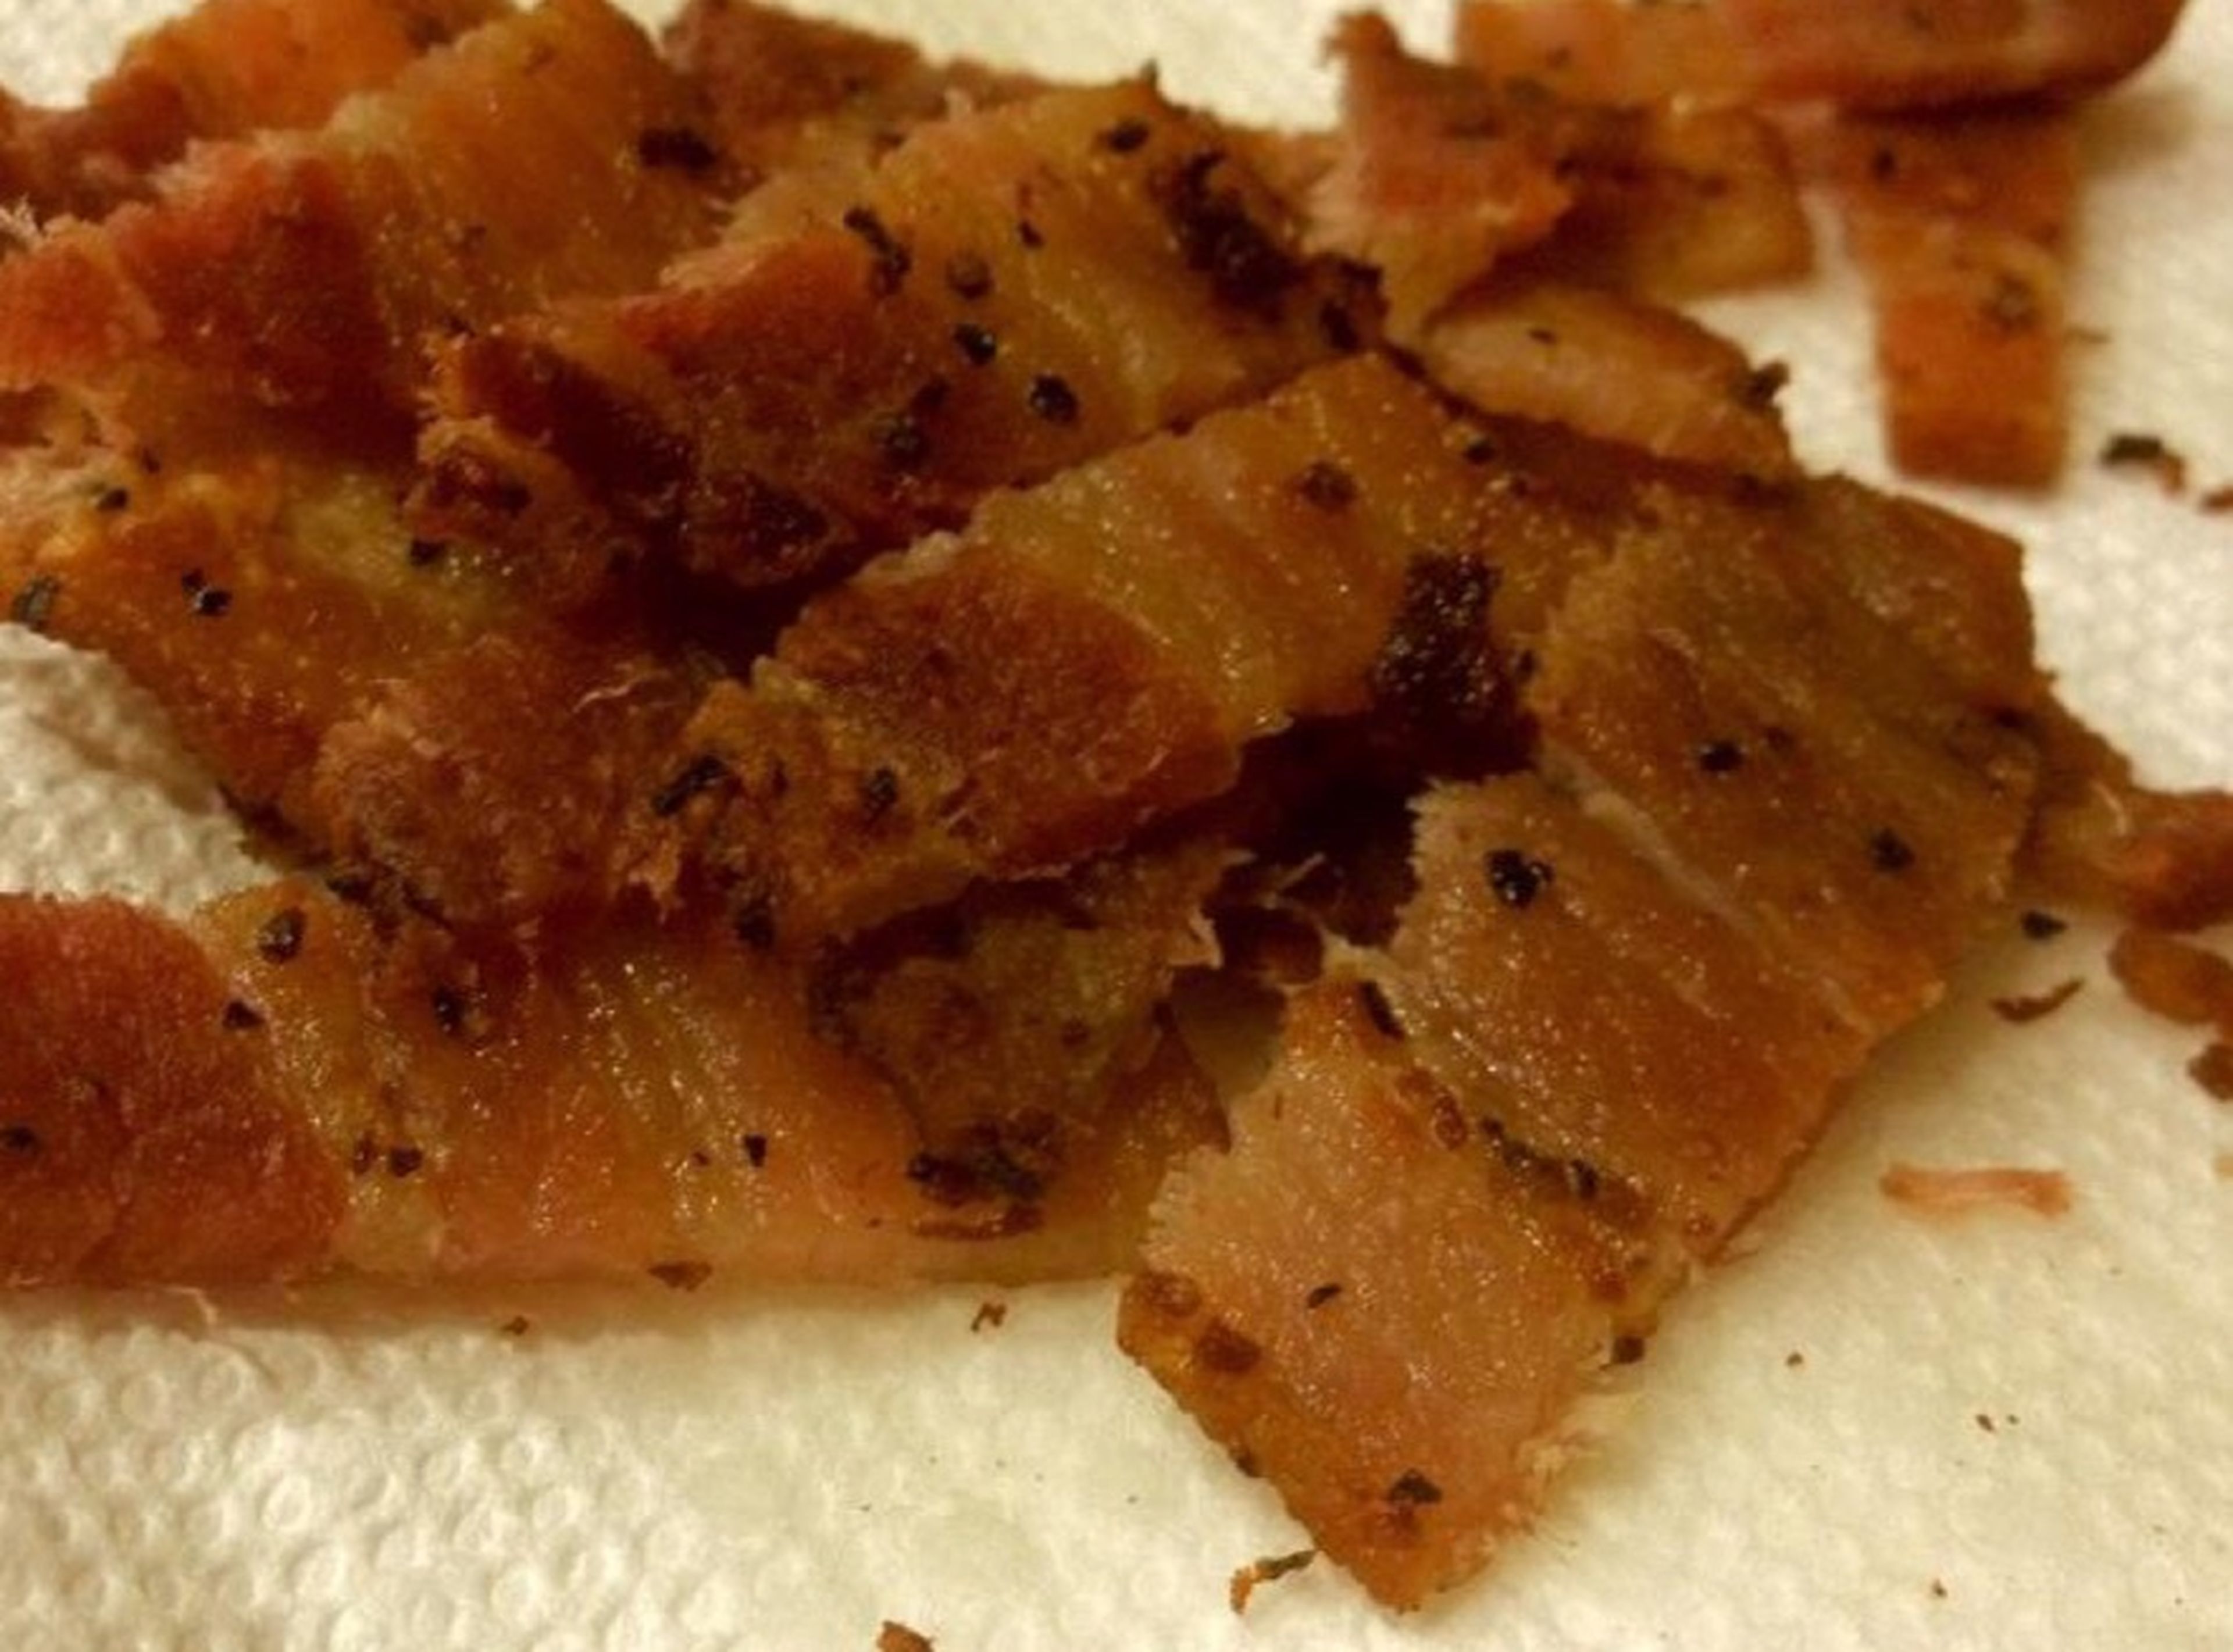 Fry bacon, then remove bacon from the pan. Save the fat for cooking the halibut.